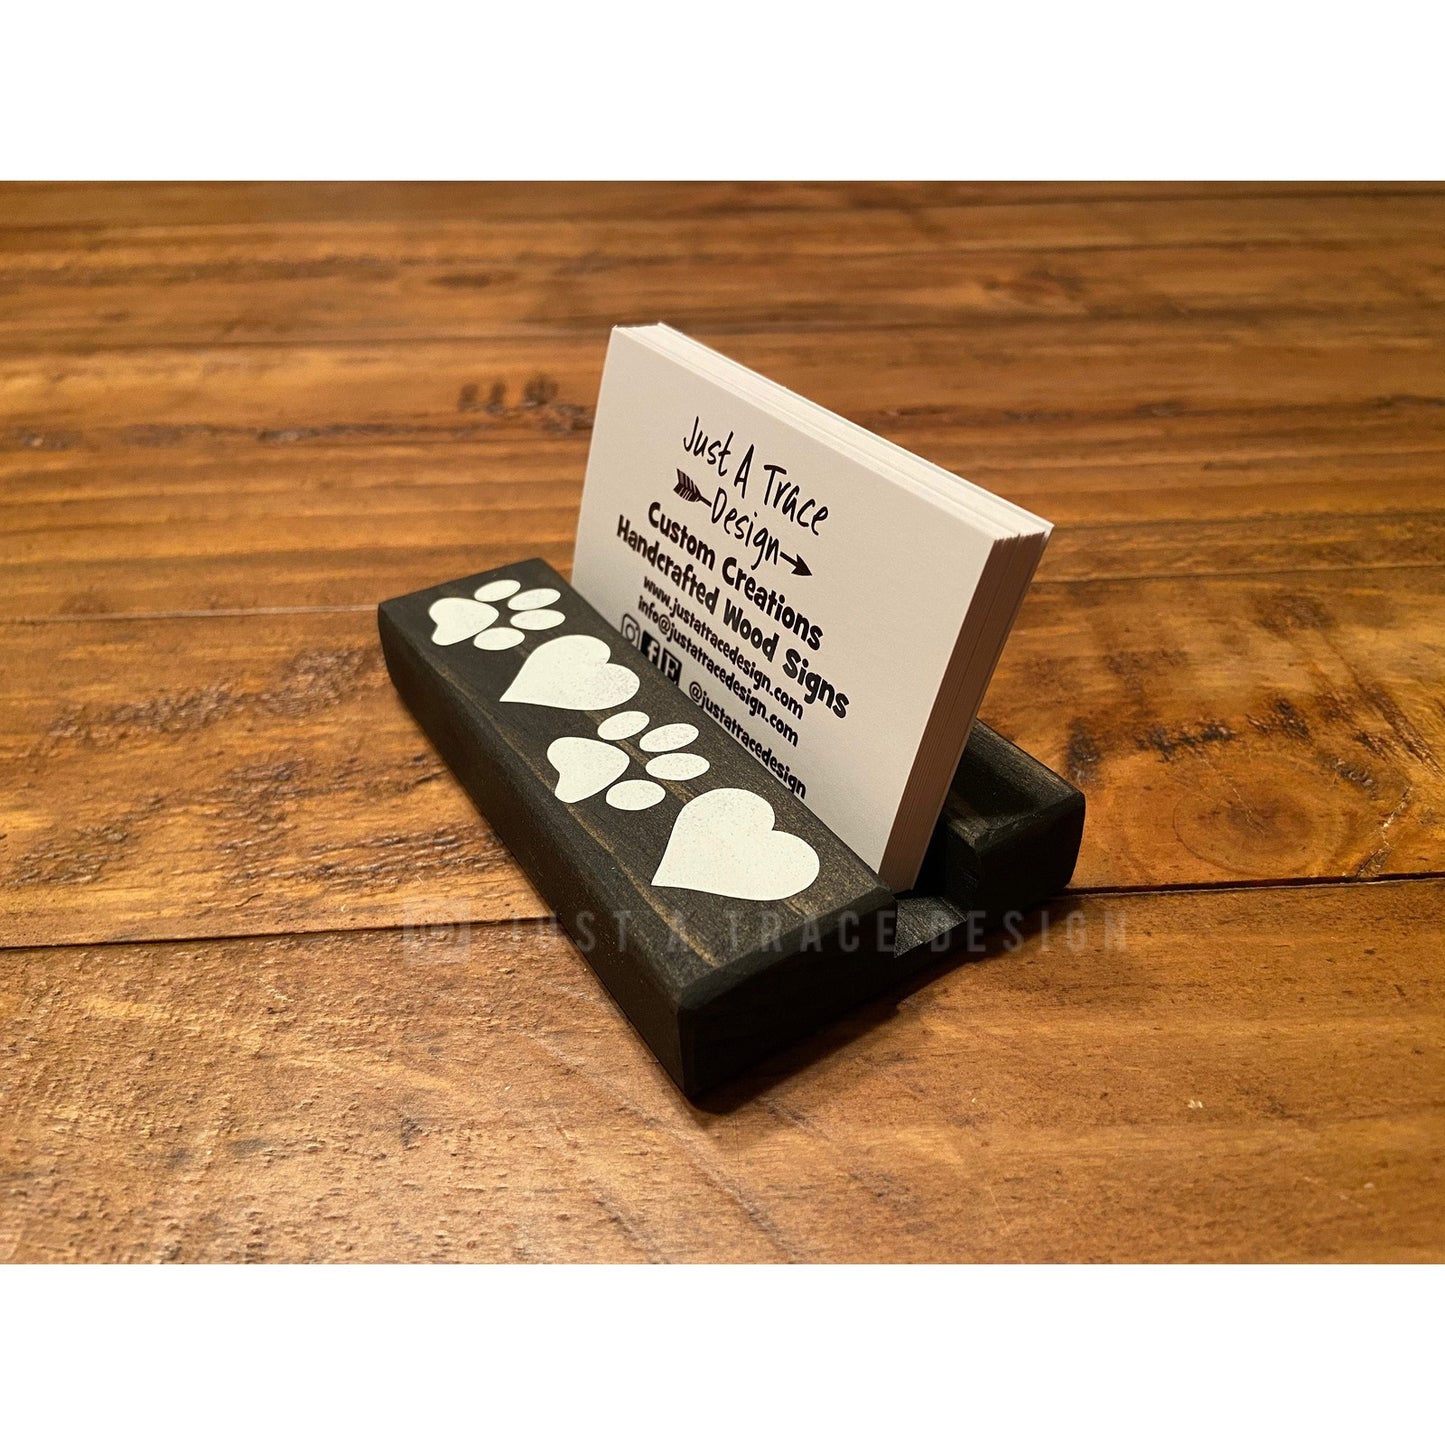 Paw & Heart Paw Prints Wood Business Card Holder - Business Cards - Desk Accessory - Business Gift - Dog Paw Print - Pet